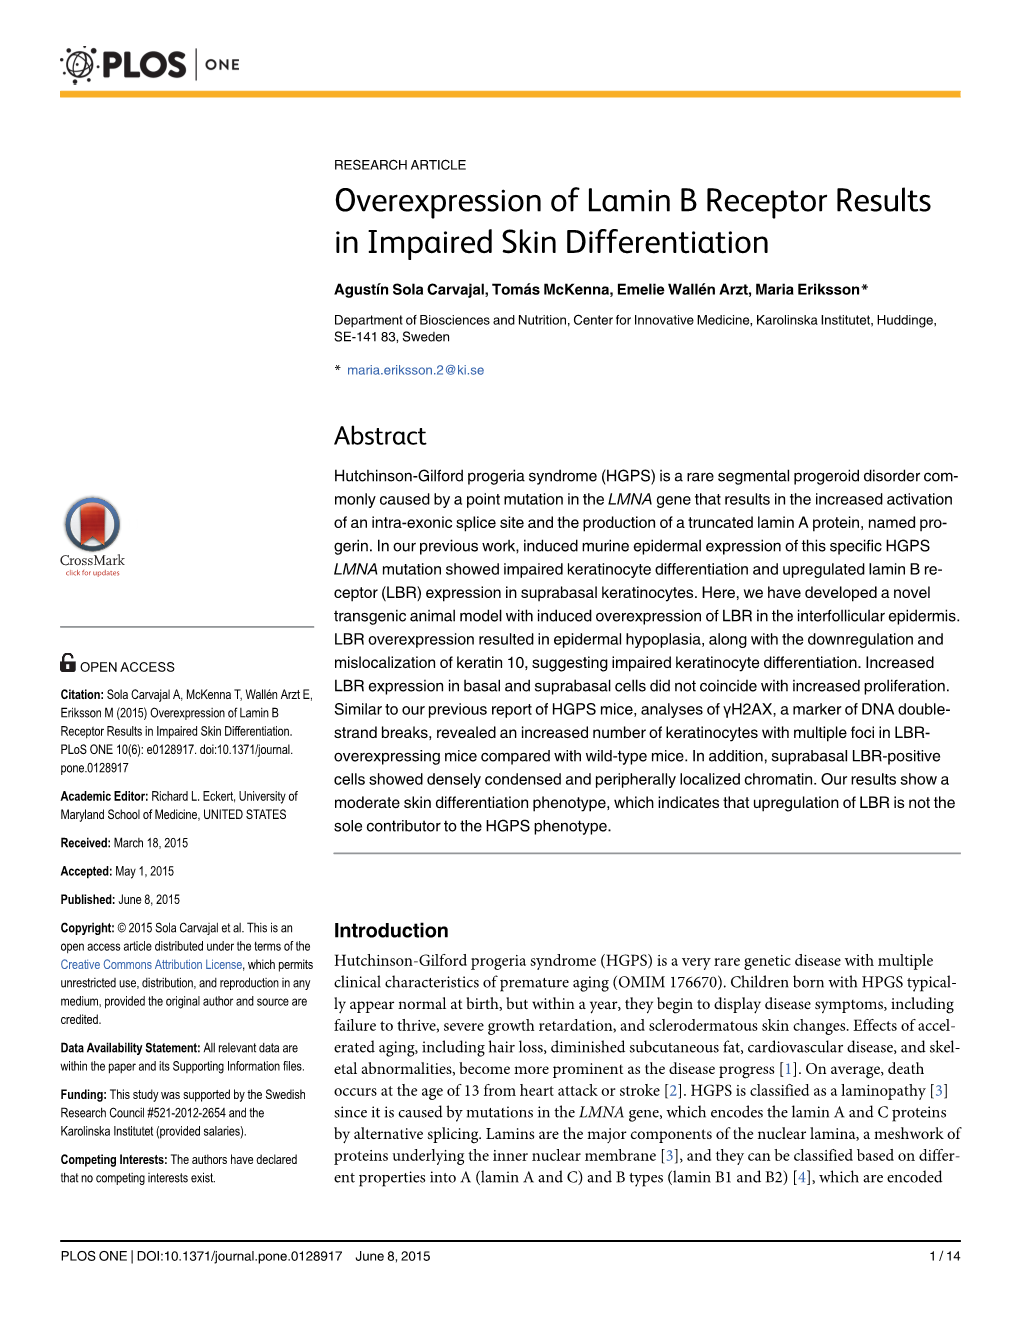 Overexpression of Lamin B Receptor Results in Impaired Skin Differentiation